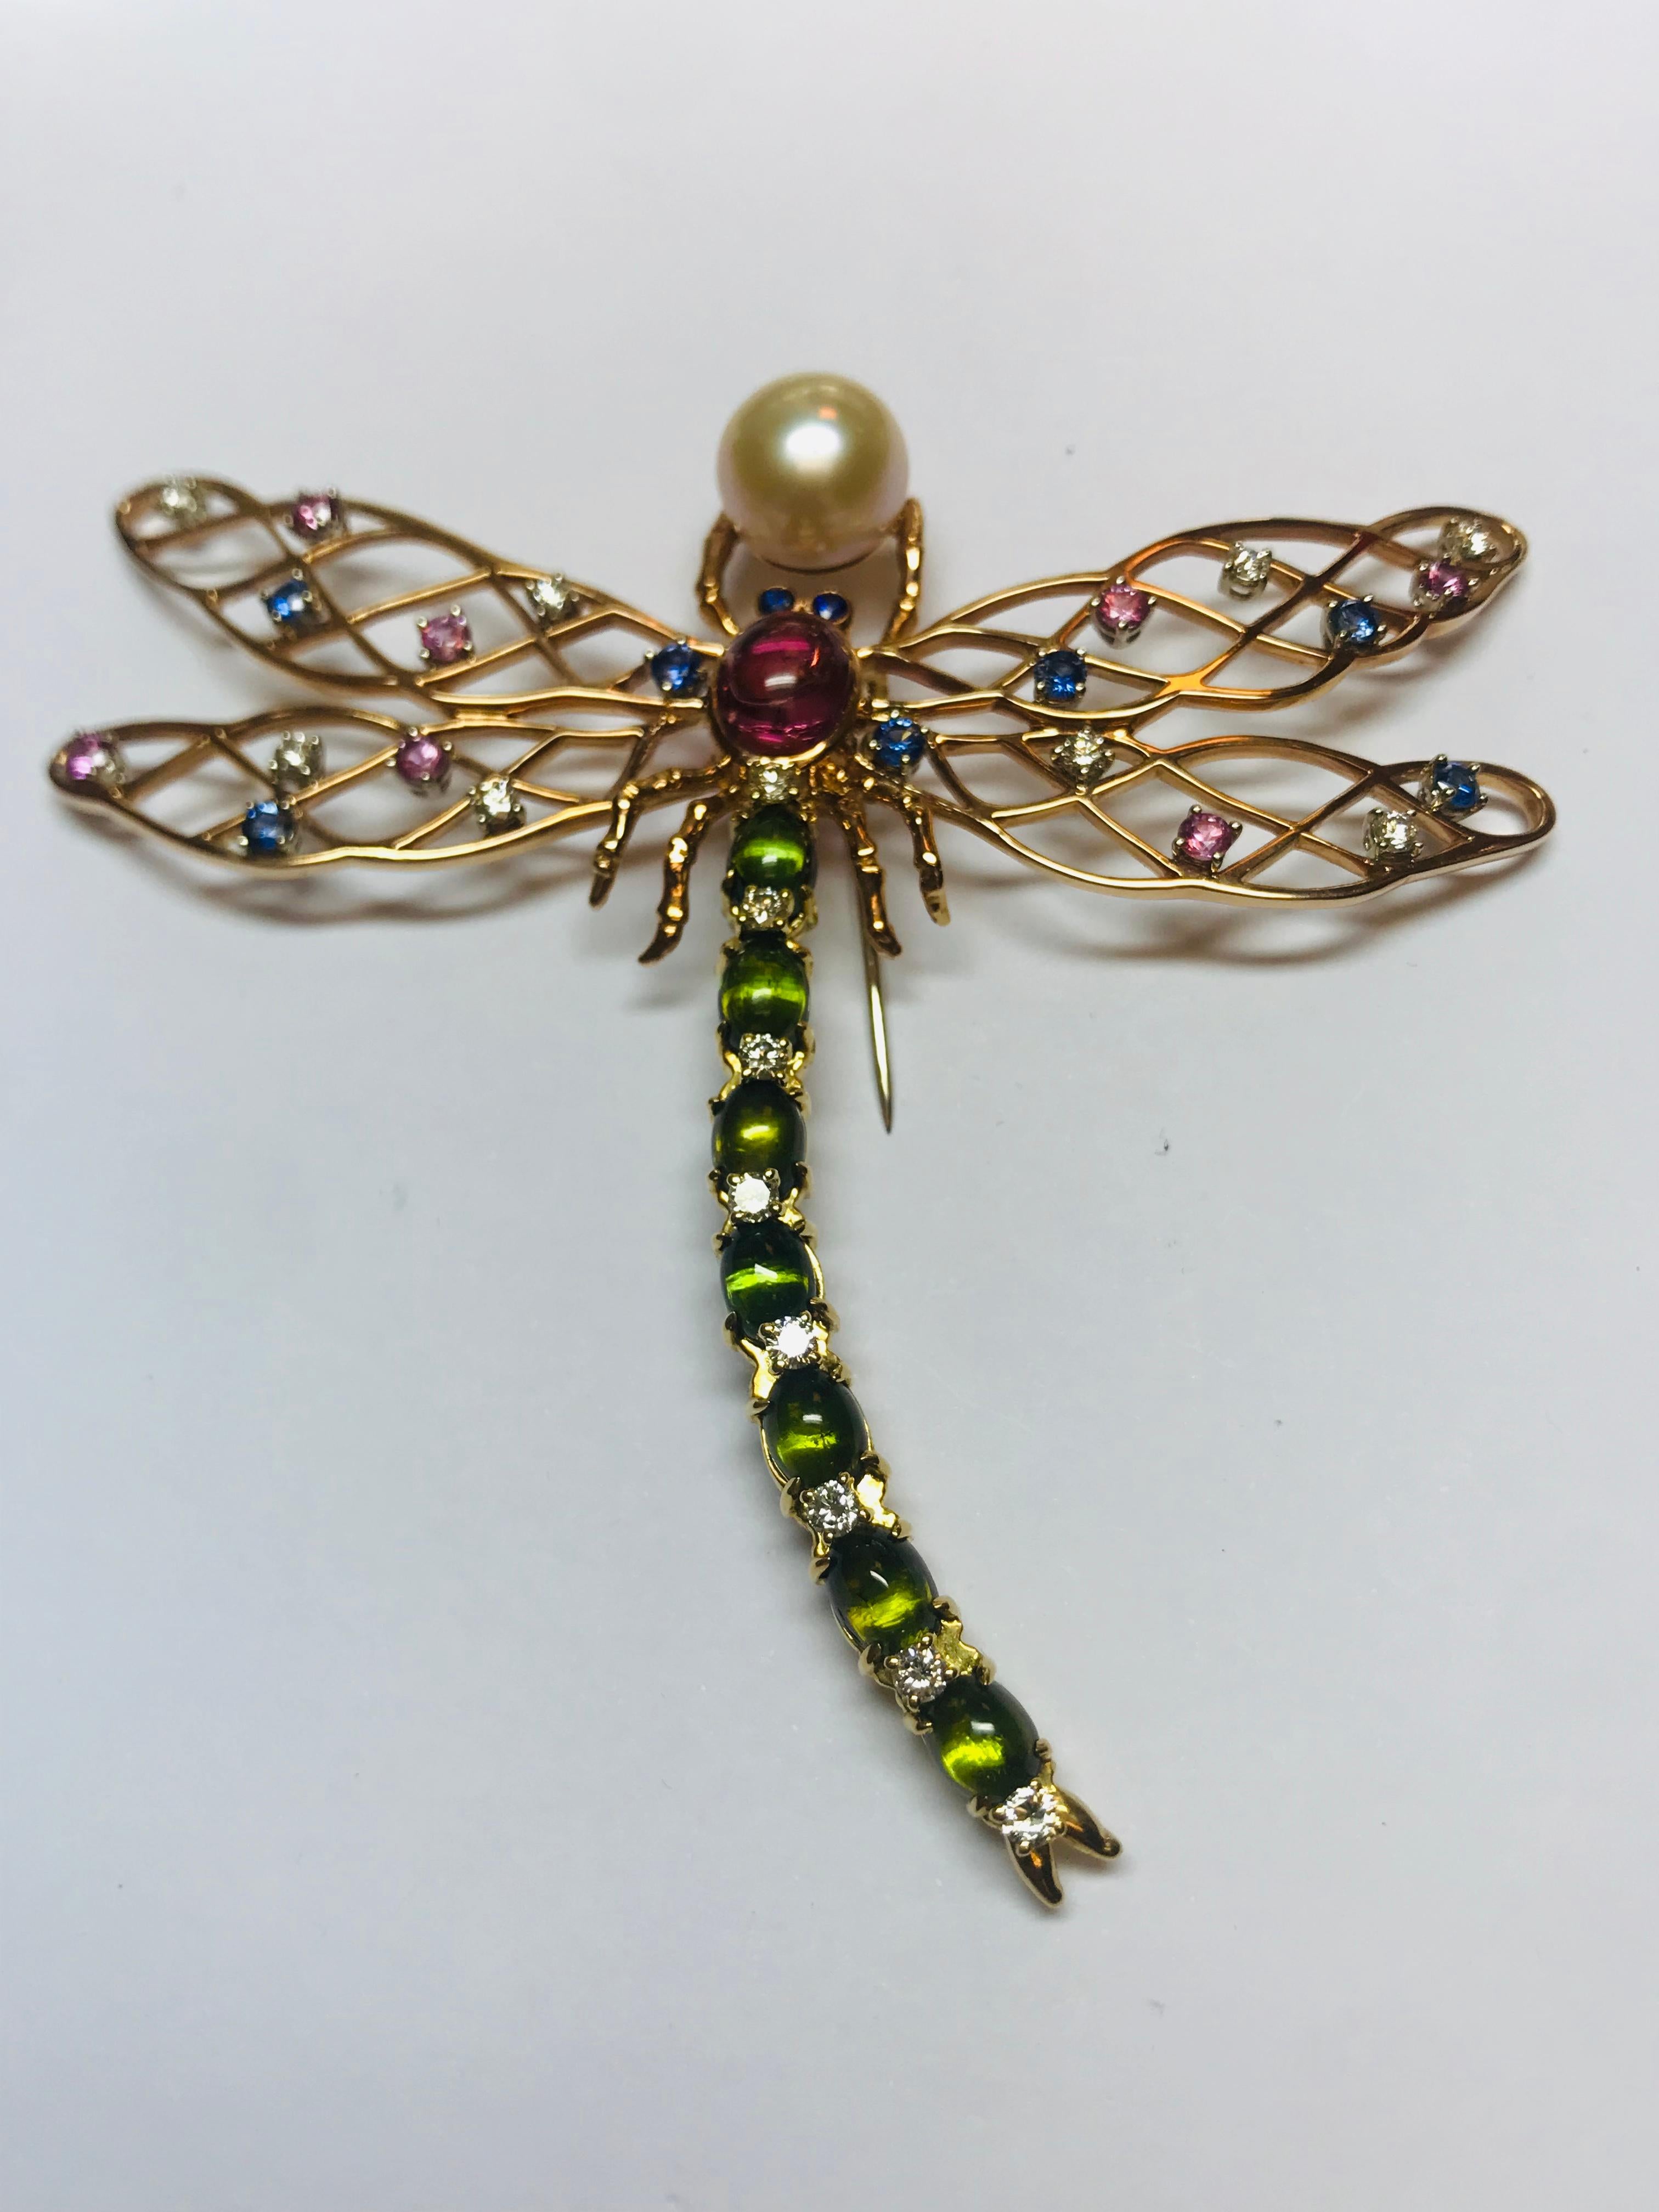 This Dragonfly brooch is a one off creation with spectacular detail. The combination of 7 cabochon cut gem quality Green Tourmalines in the tail and a large Pink Tourmaline in the center along with 1.17 carats of diamonds and .93 carats each of Pink